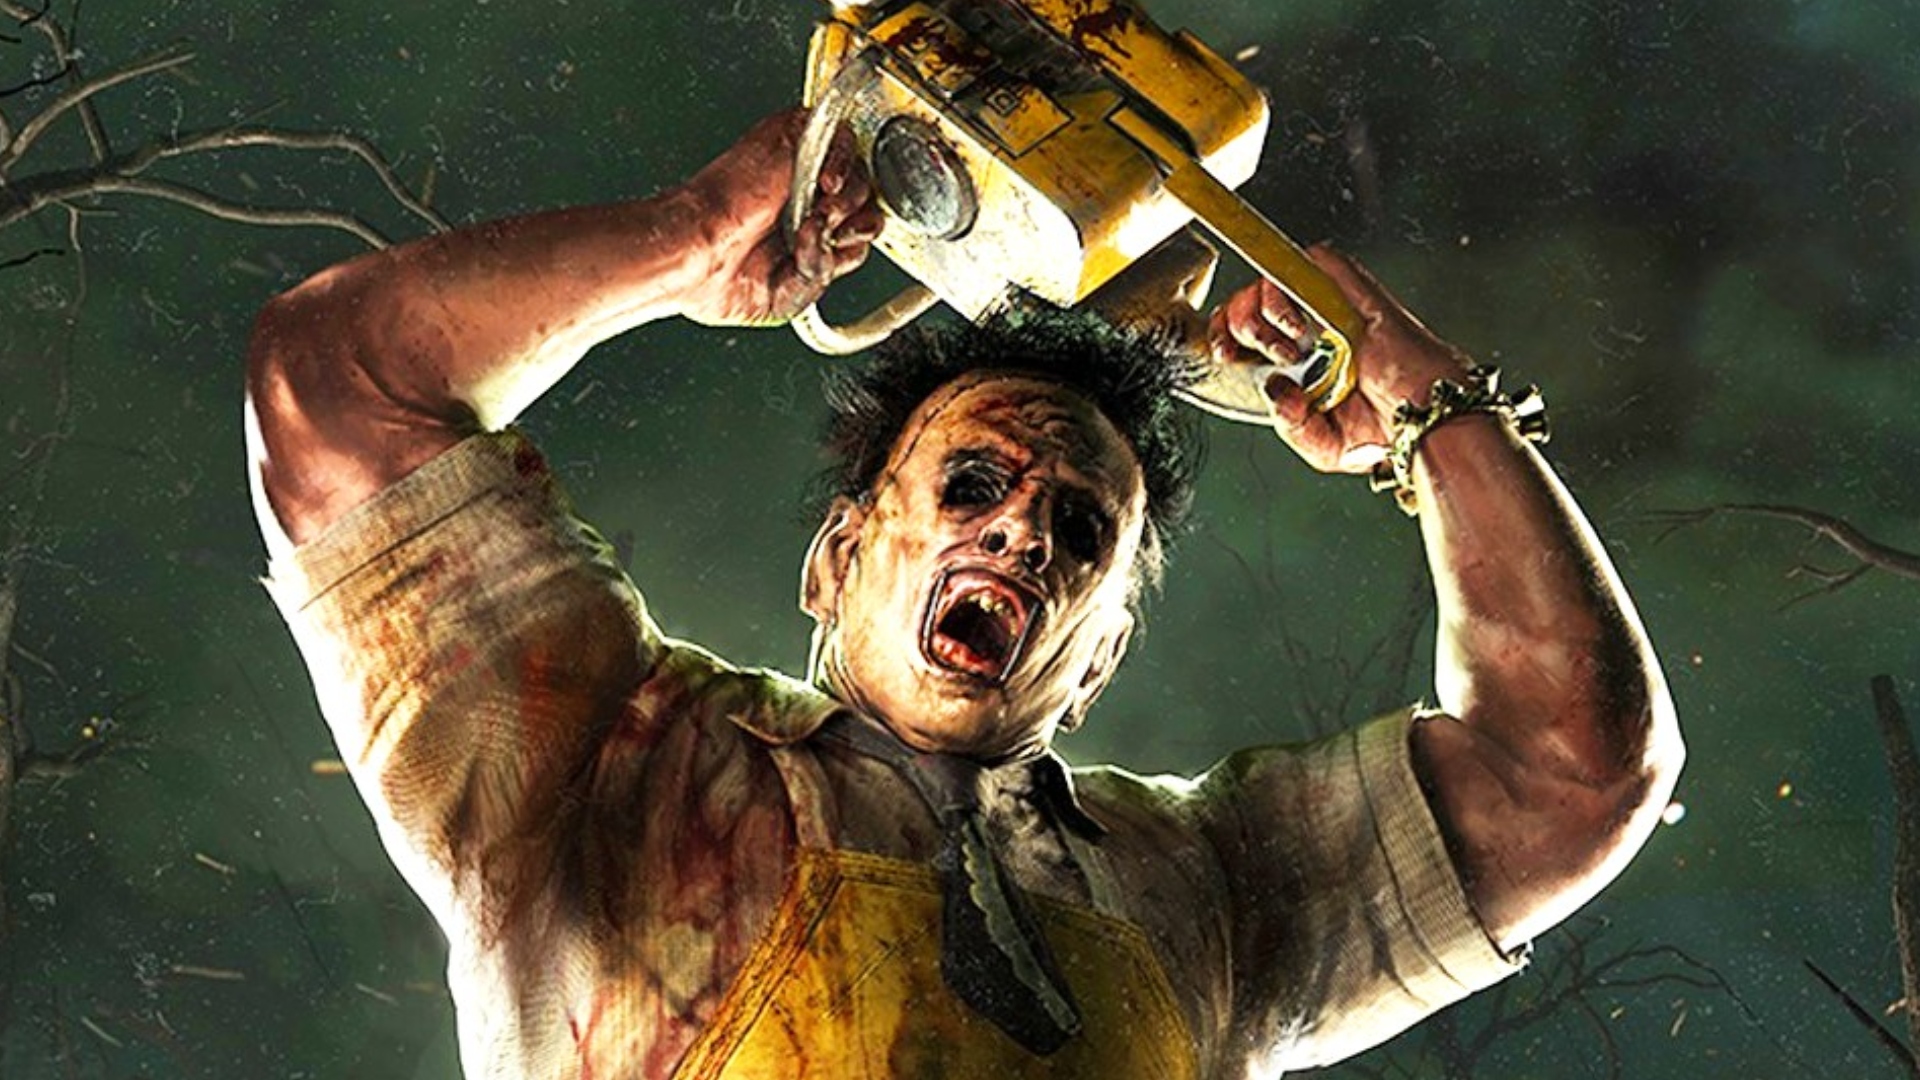 Dead by Daylight character Leatherface isn't getting the chop, yet